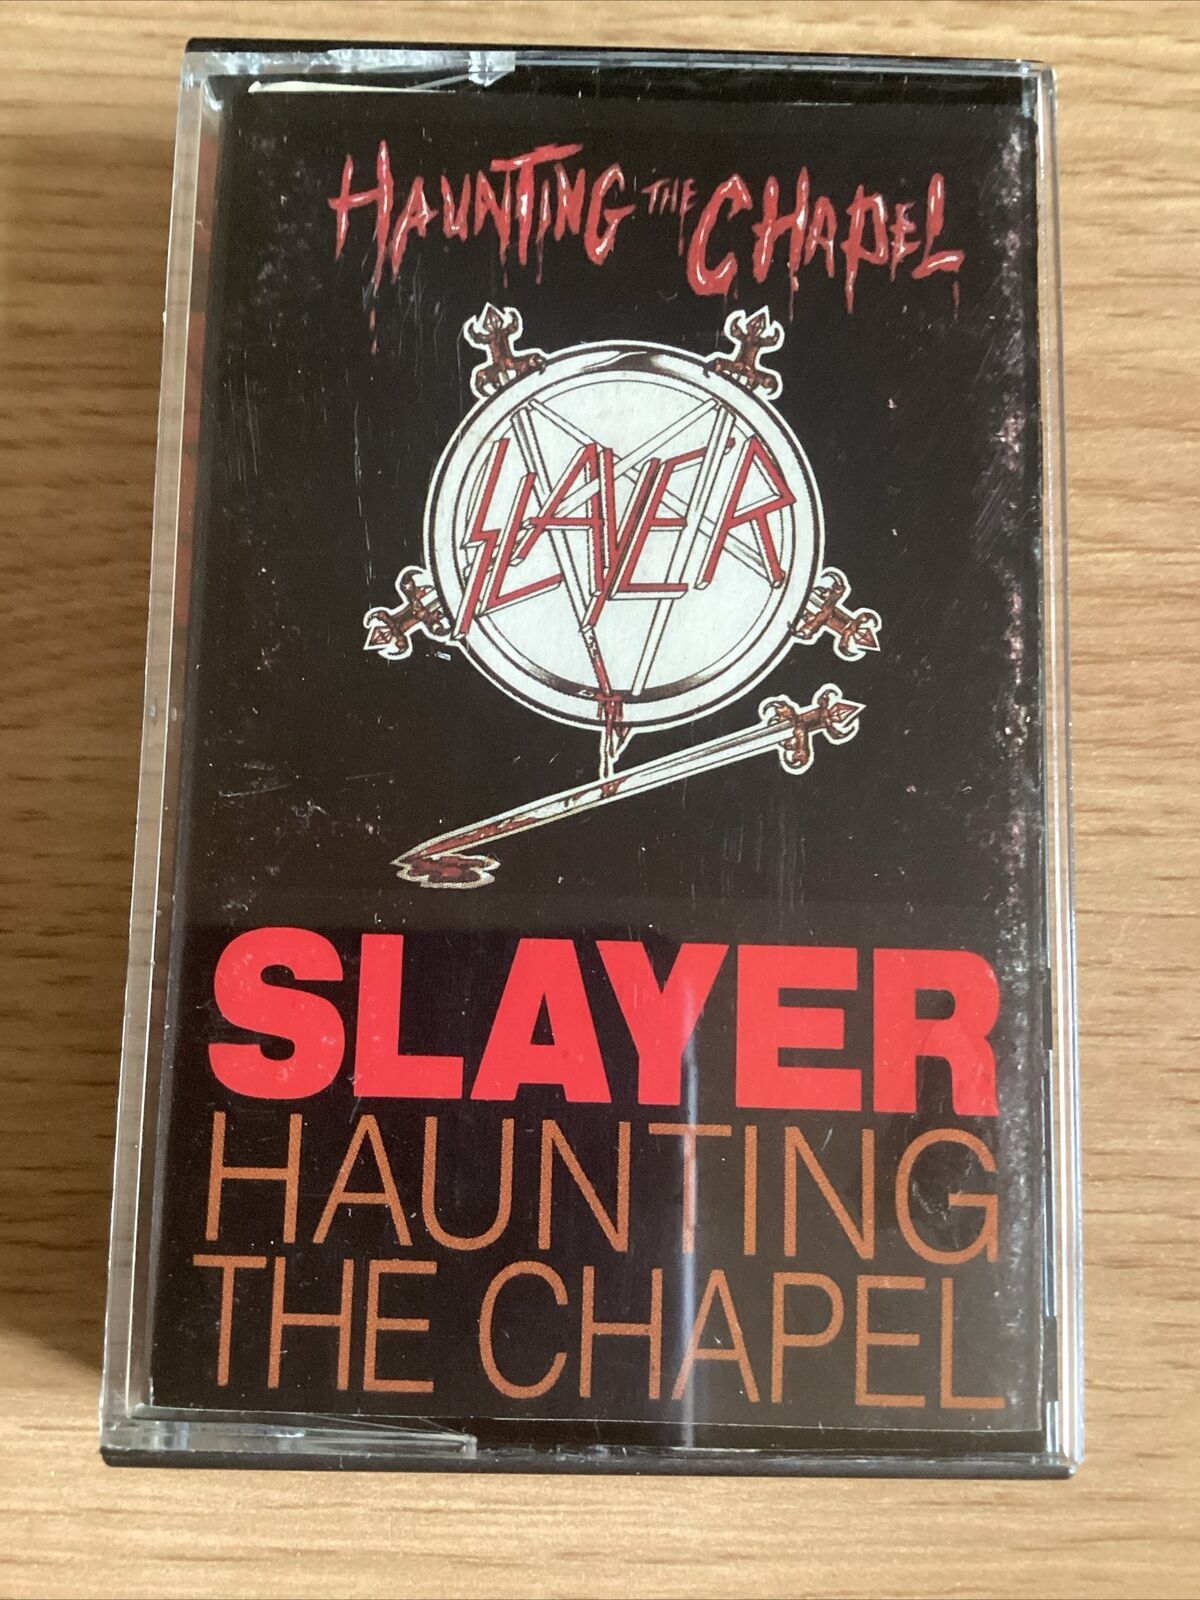 Slayer "Haunting The Chapel" 1987 Cassette Metal Blade Records